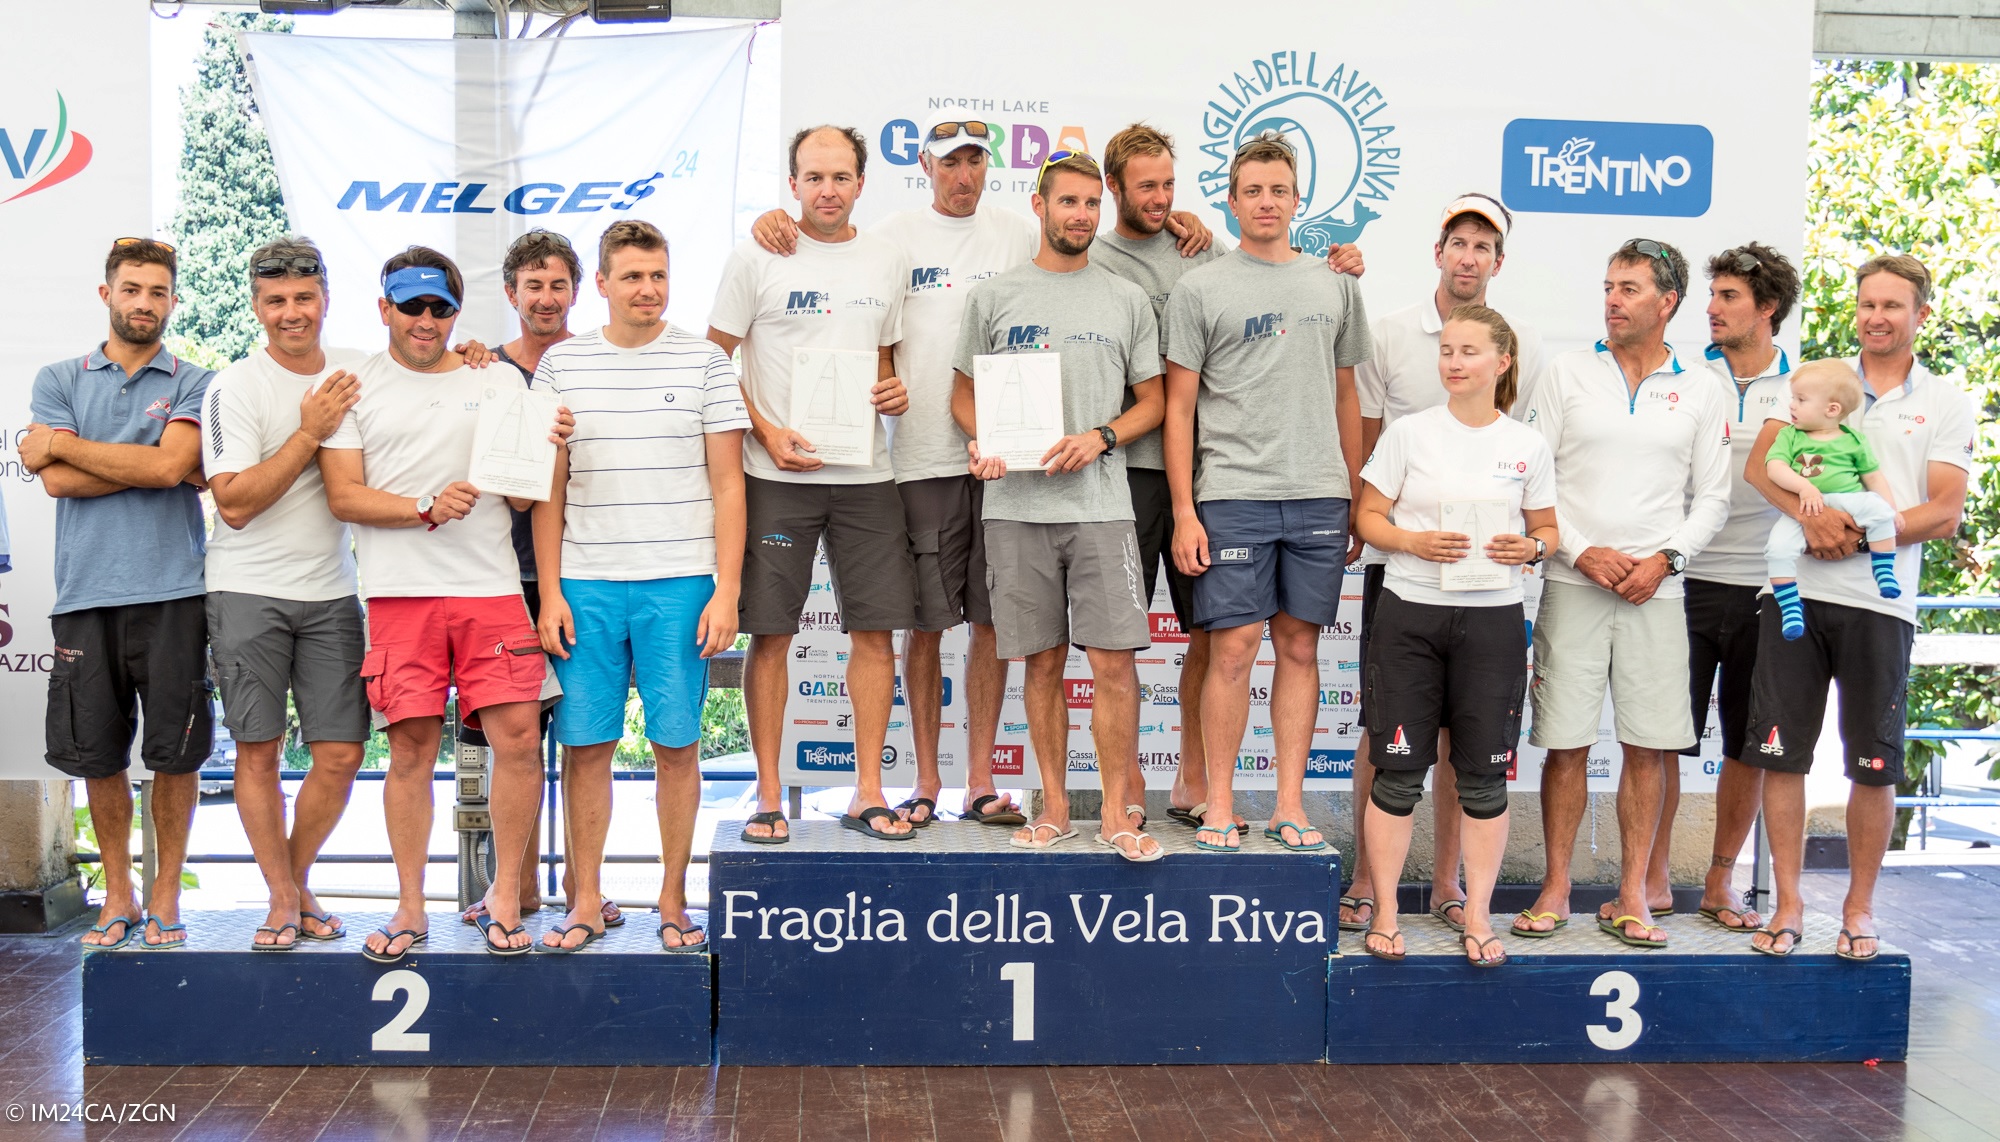 The winners of the Melges 24 European Sailing Series 4th event in Riva del Garda